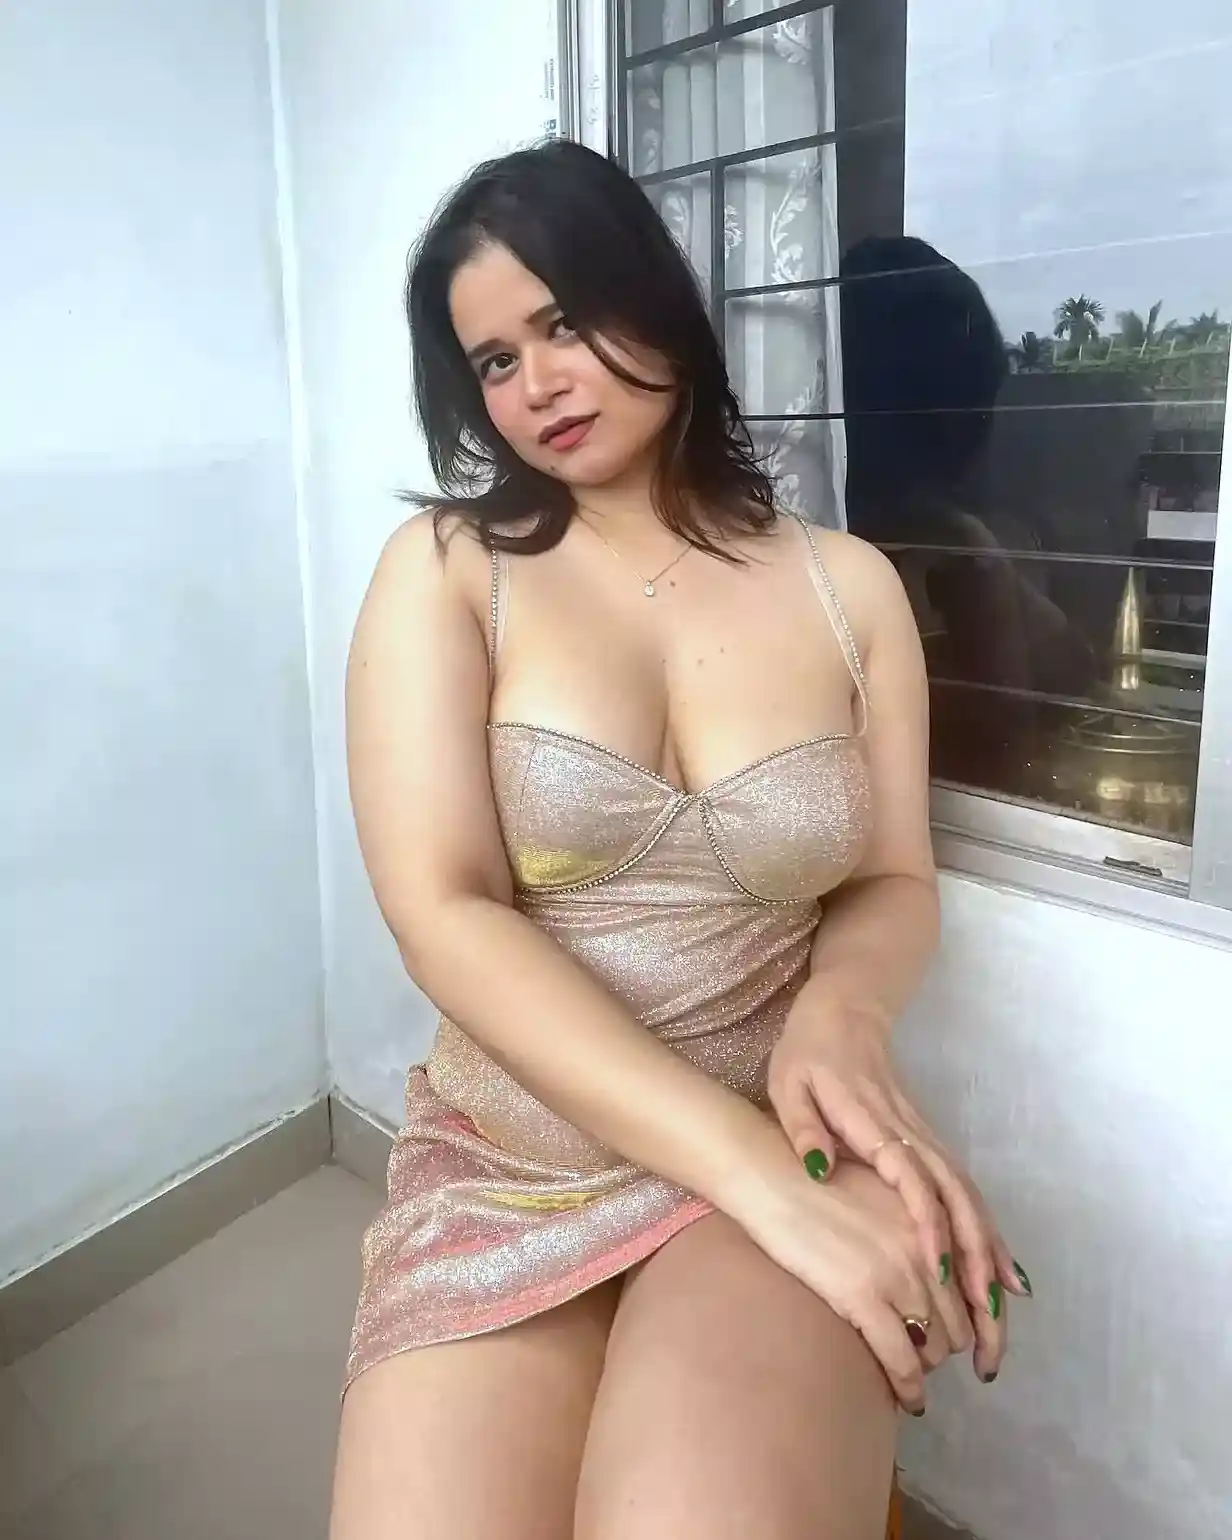 Dikshita kashyap cheap borivali call girls mumbai hotel affordable rate get free home delivery sexual